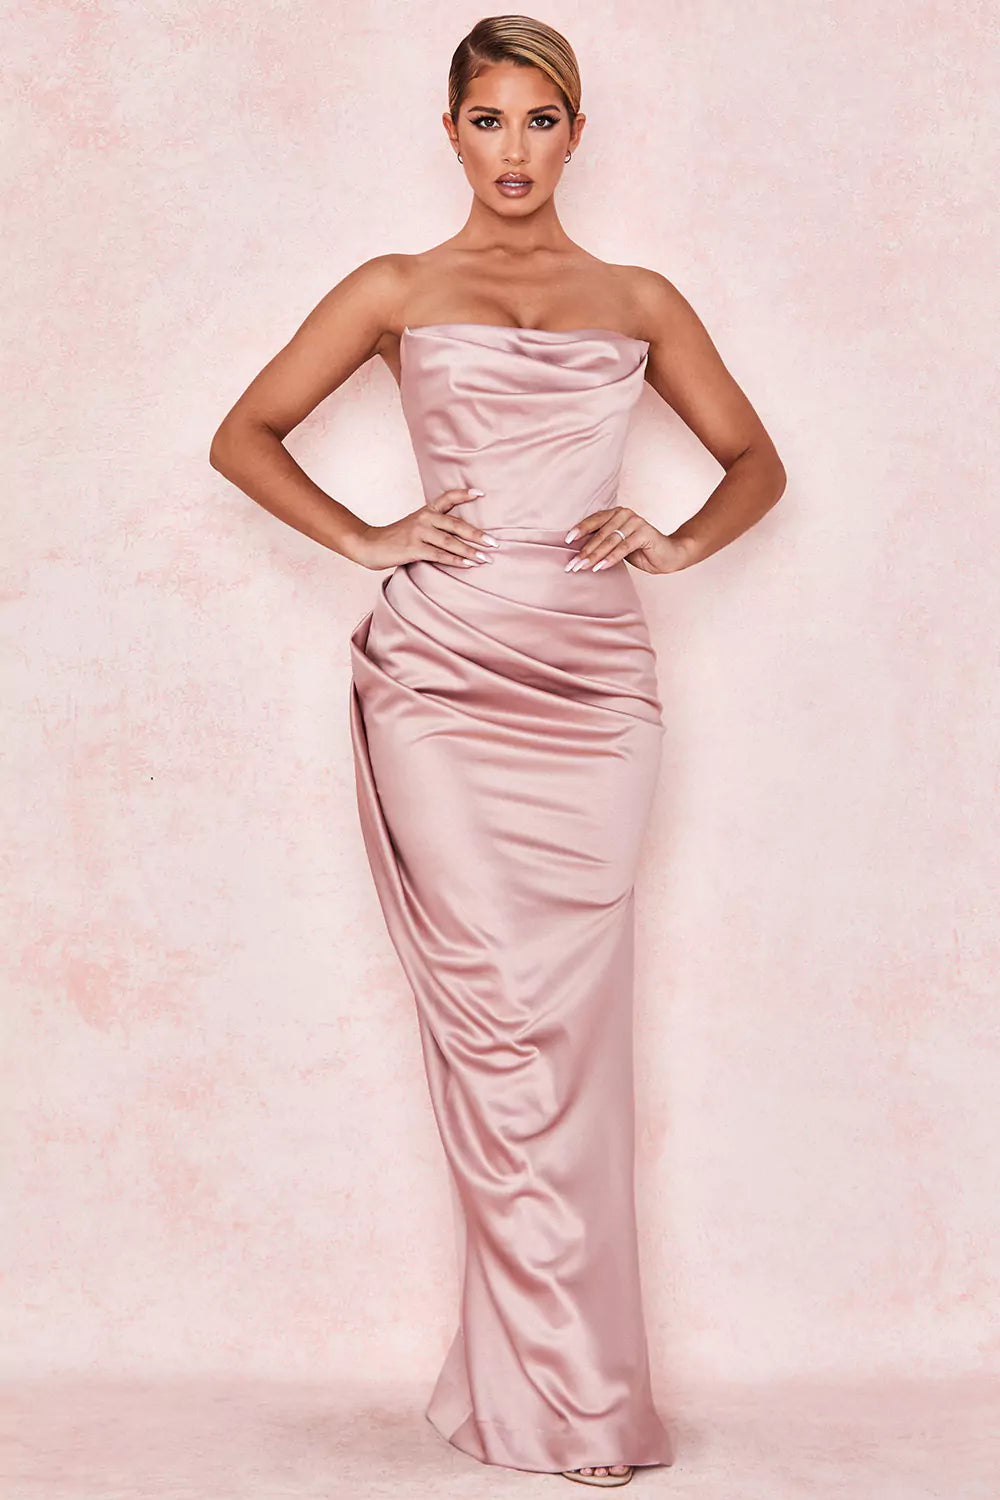 The model is wearing a pink strapless maxi dress.